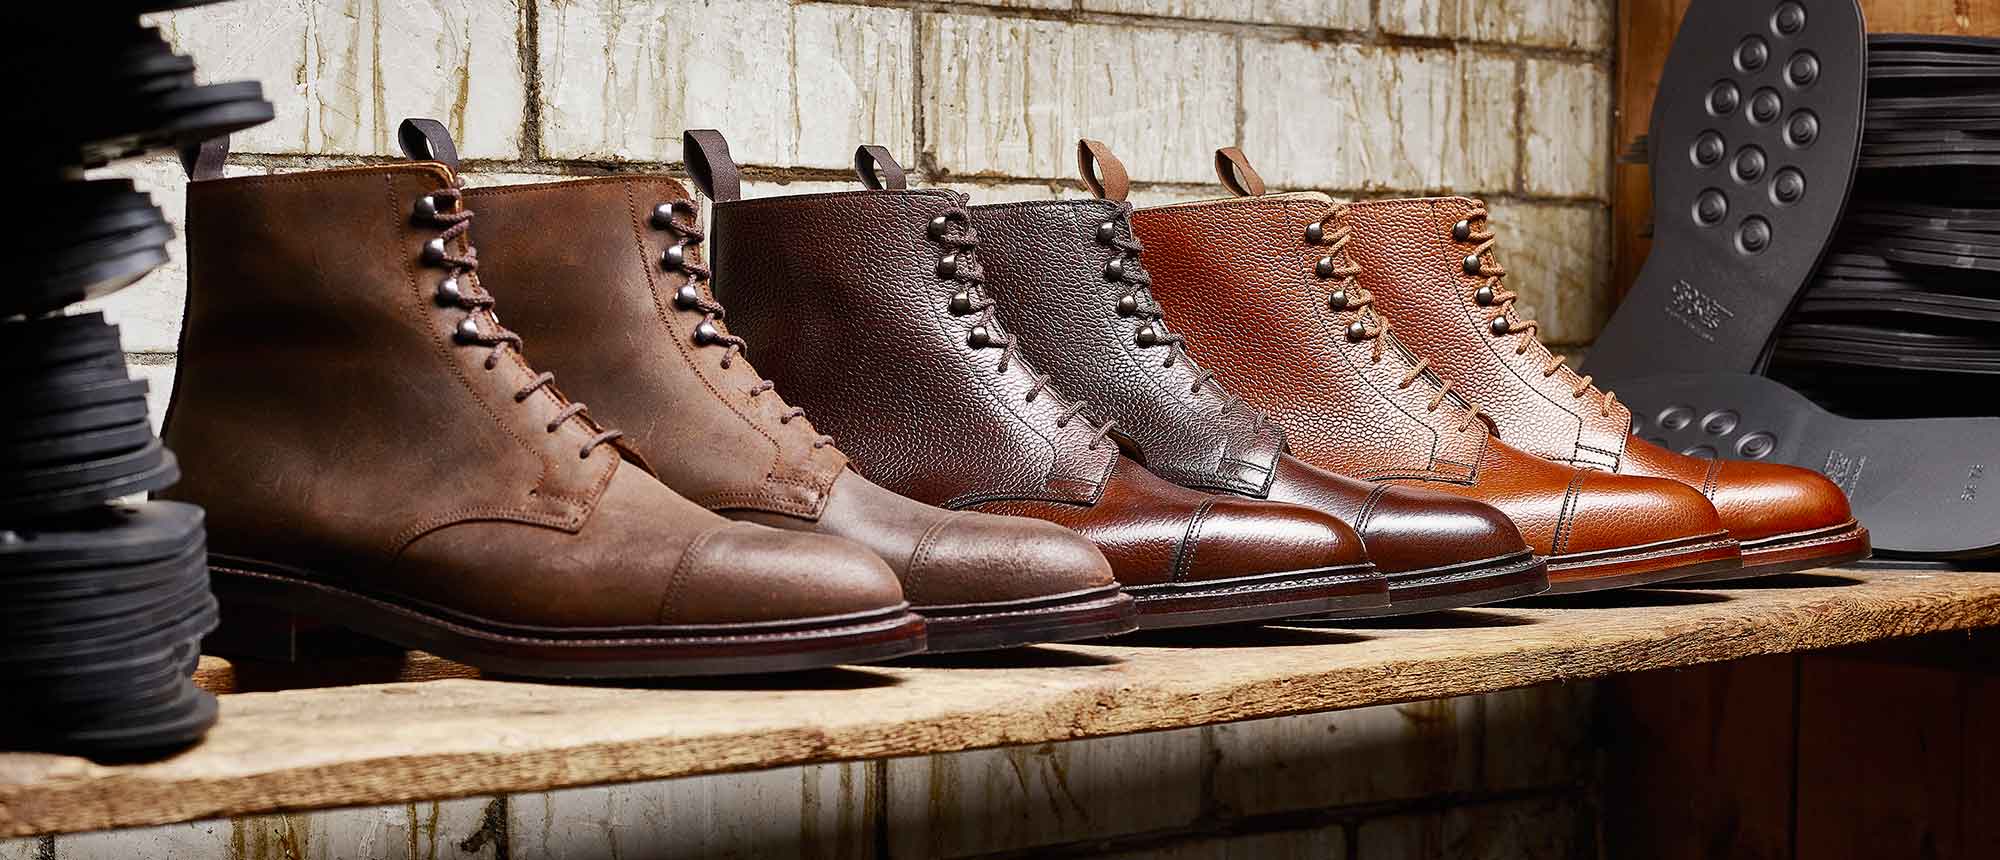 Crockett & Jones has your winter booting all laced up